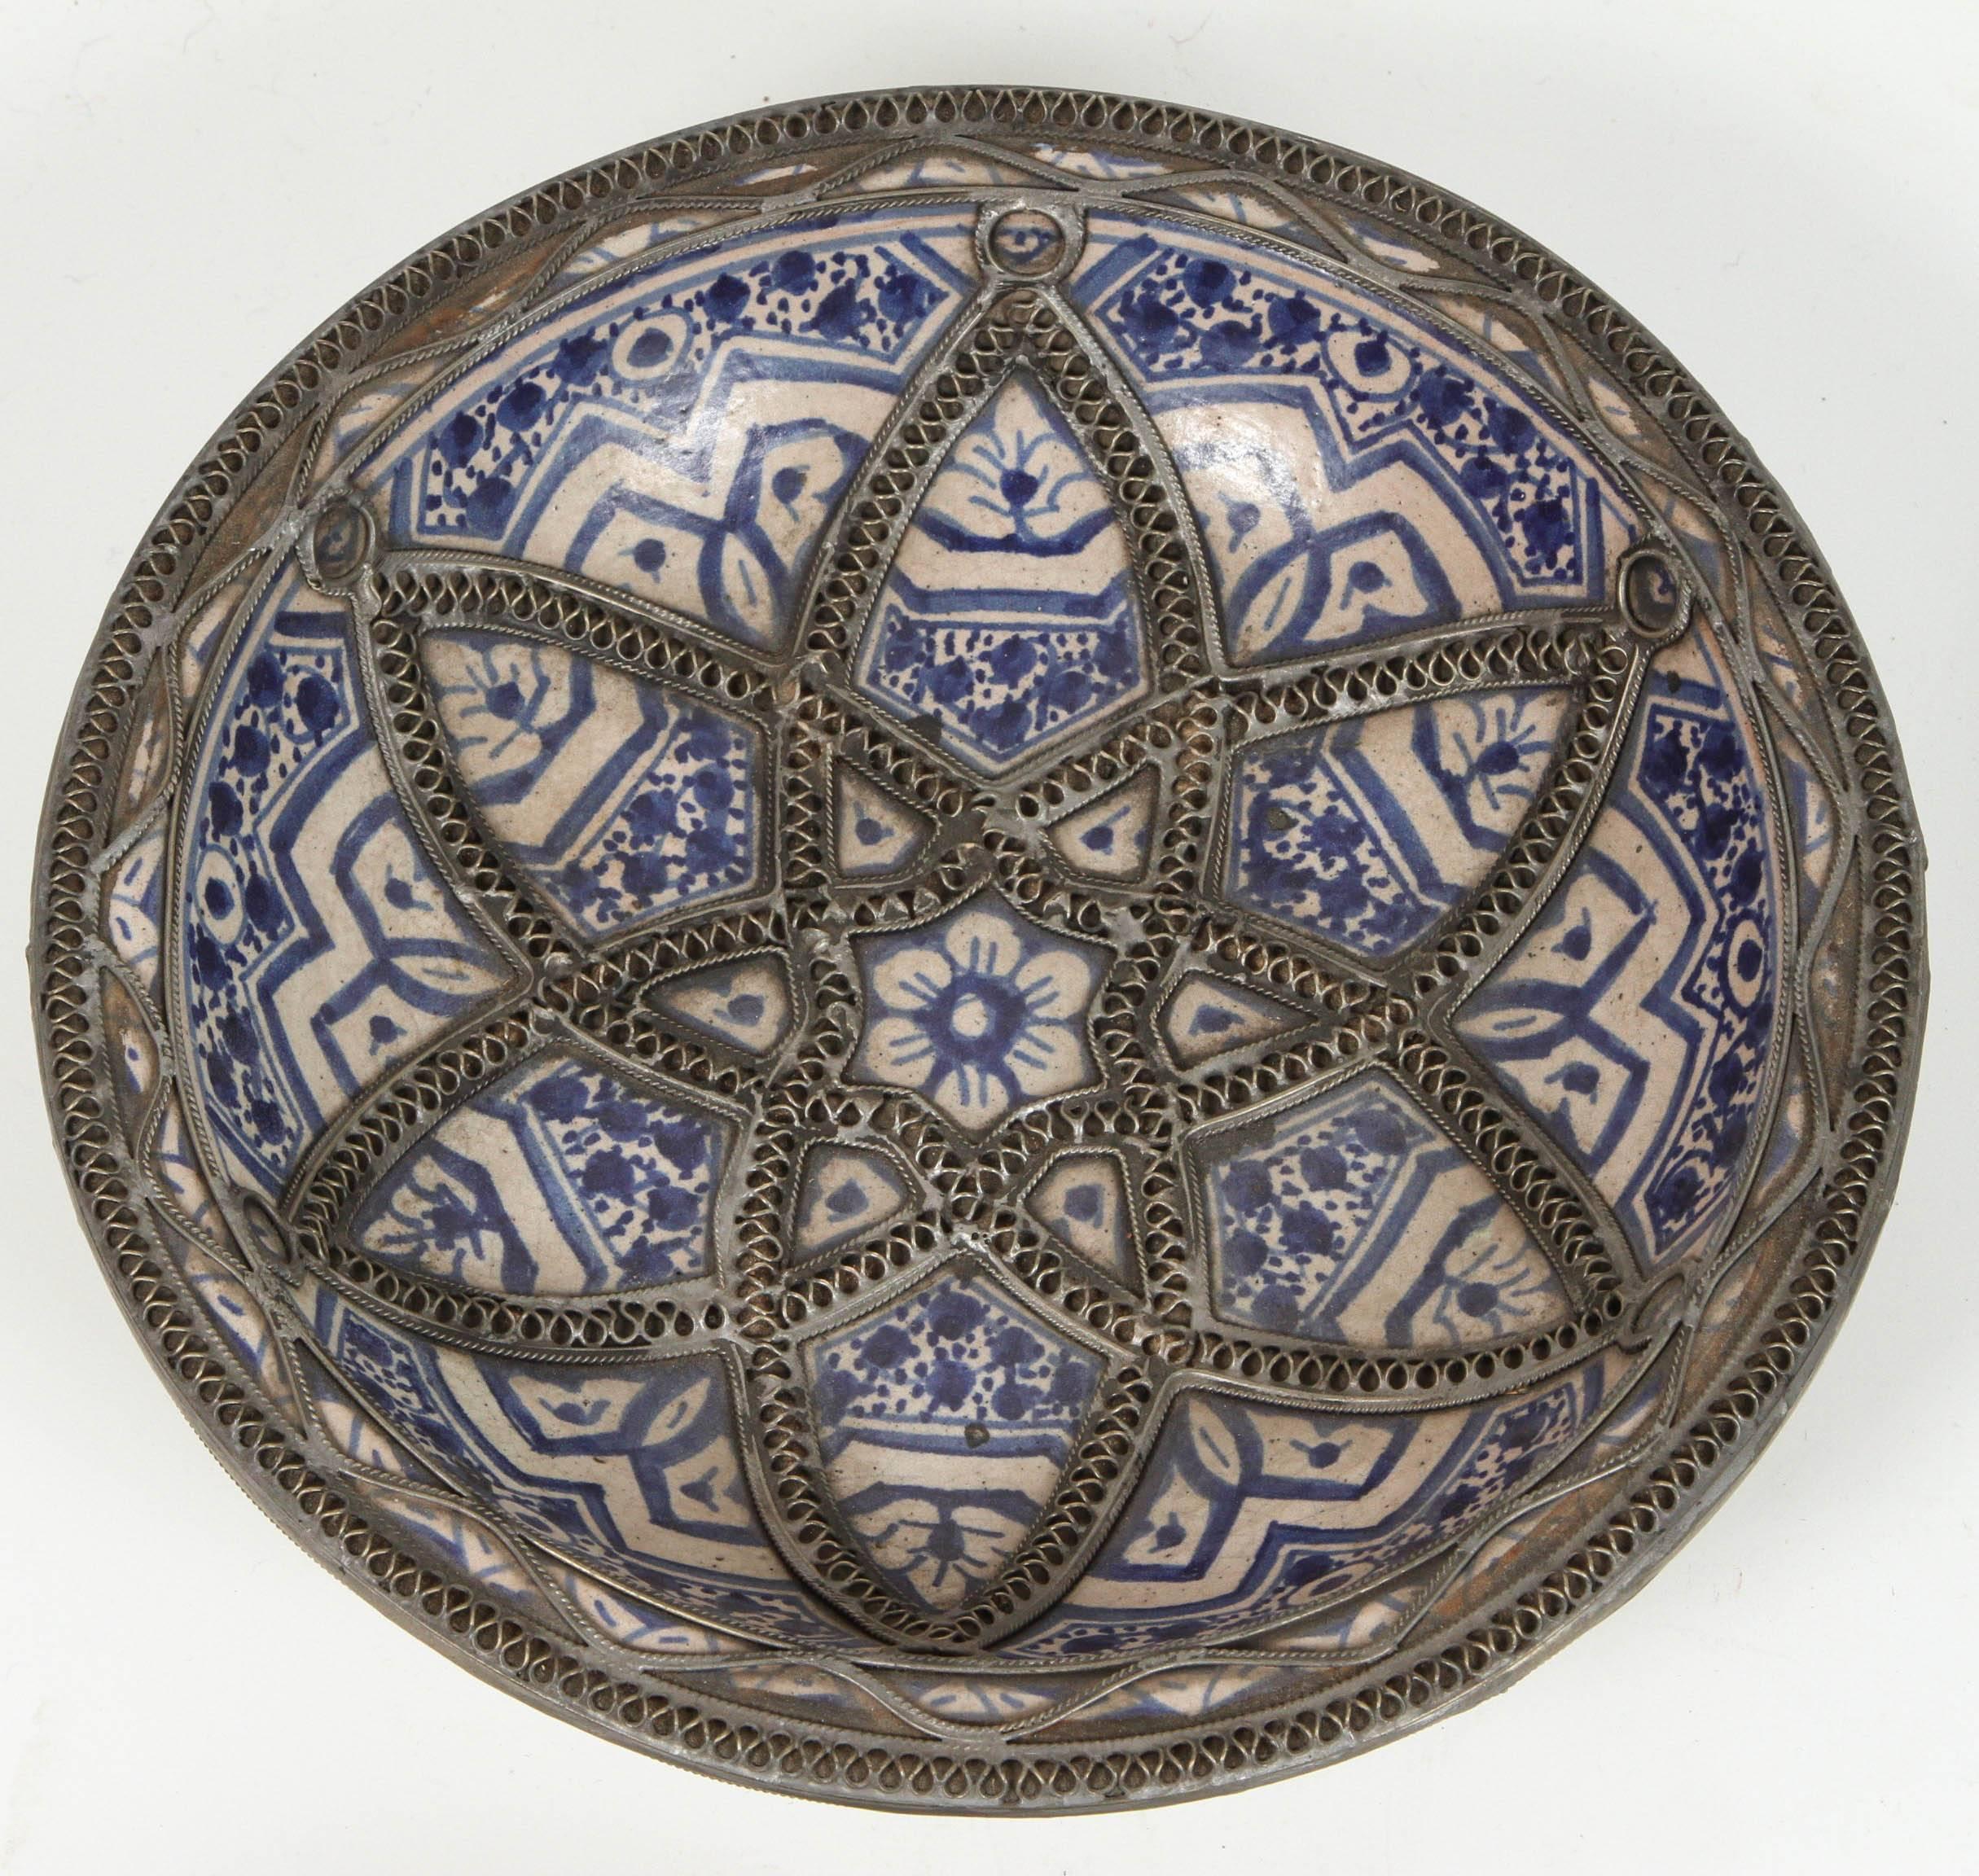 Hand-crafted set of four Moroccan decorative ceramic plates from Fez.
Hand-painted in Bleu de Fez, very nice designs hand-made by artist in Fez.
Geometrical and floral designs and adorned with nickel silver filigree designs.
Could be hang on the